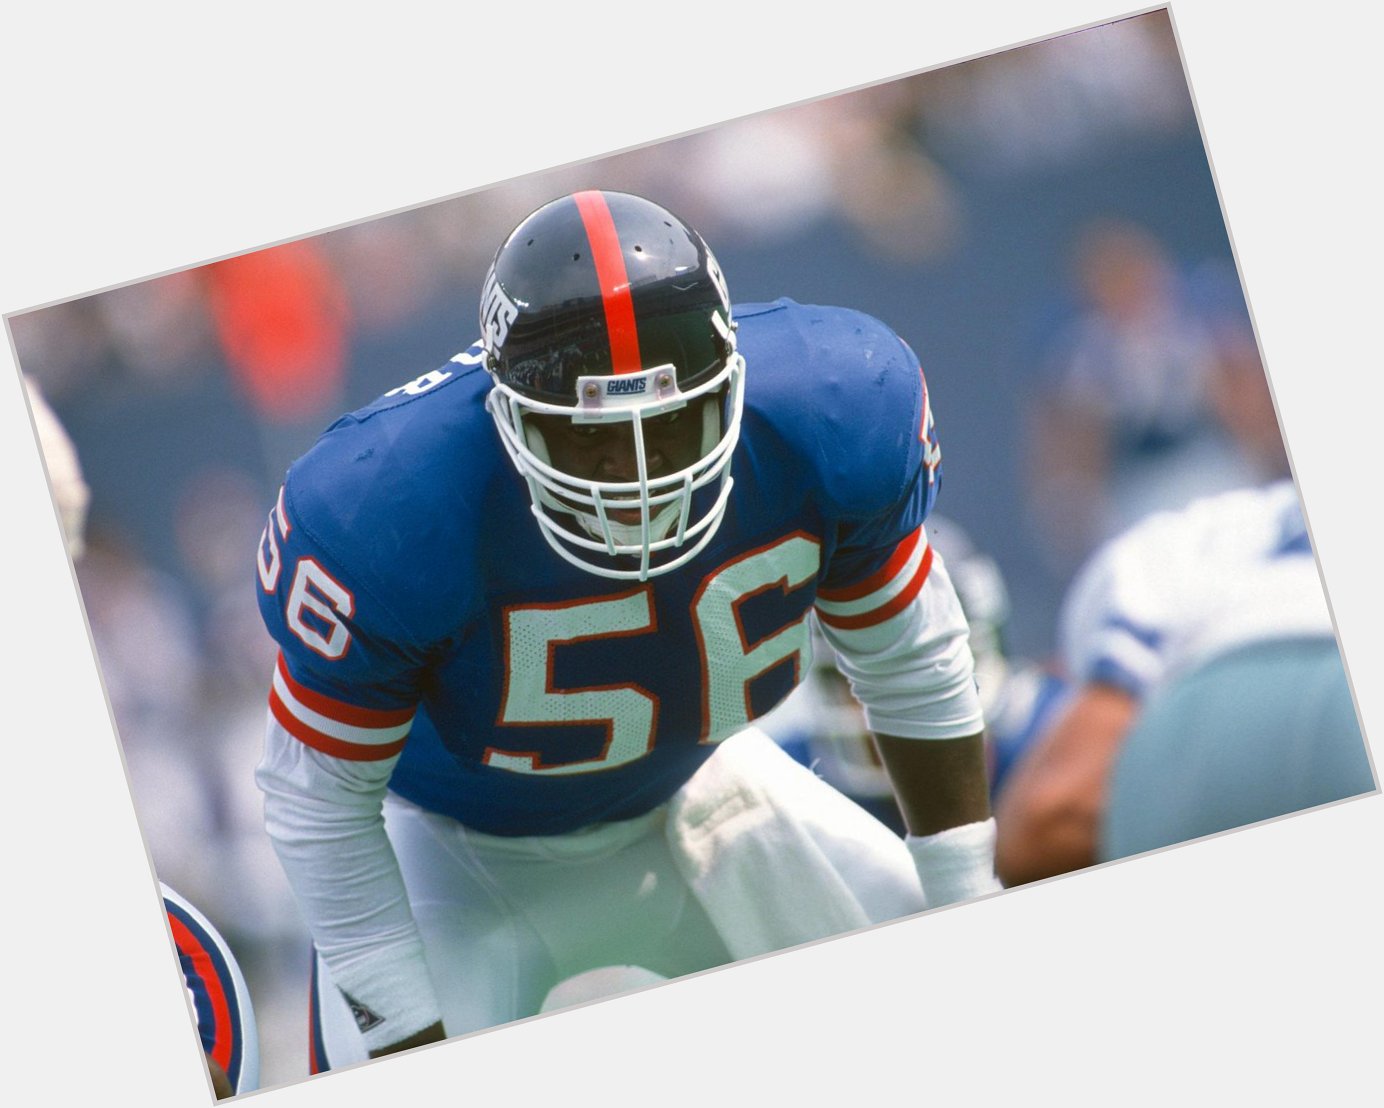 Happy 56th birthday to the great No. 56, Hall of Famer Lawrence Taylor. 